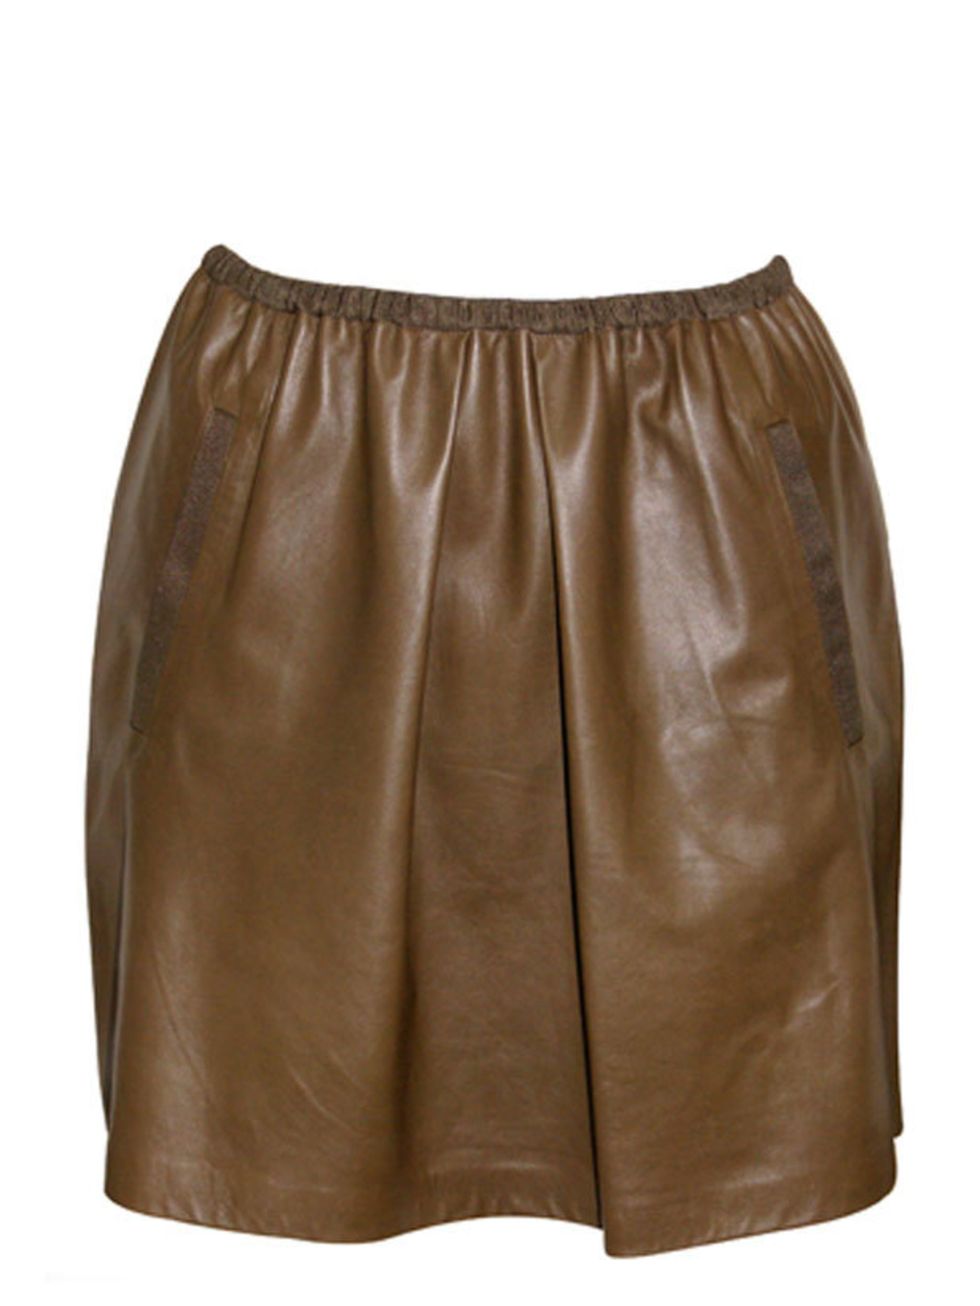 <p>Brown leather skirt, £295, by Sea NY at <a href="http://www.oxygenboutique.com/products/479/56/sea_ny_leather_skirt/">Oxygen</a> </p>